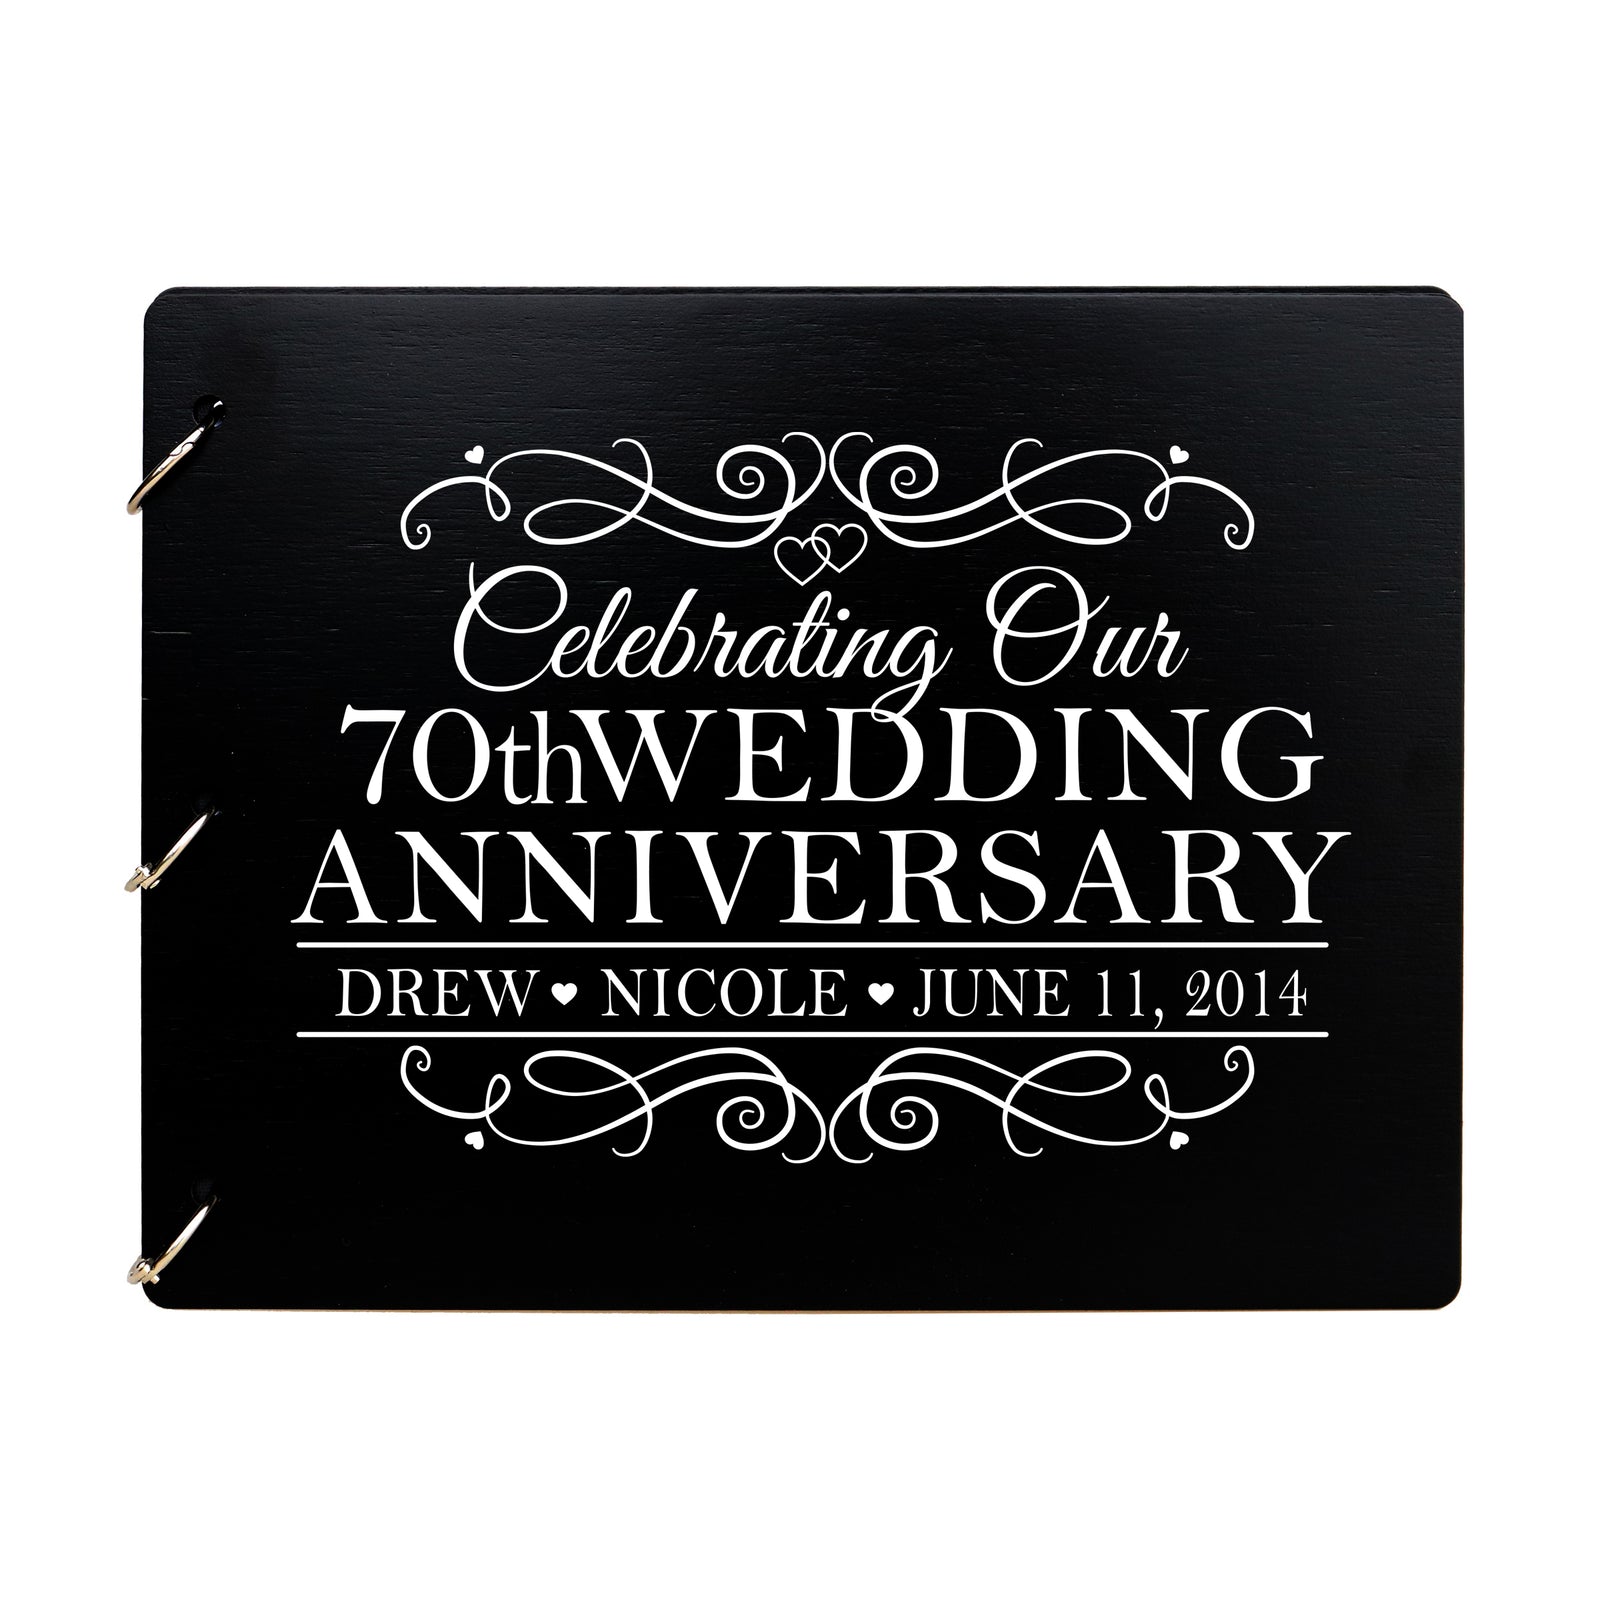 LifeSong Milestones Personalized Guestbook Sign for 70th Wedding Anniversary Gift Ideas